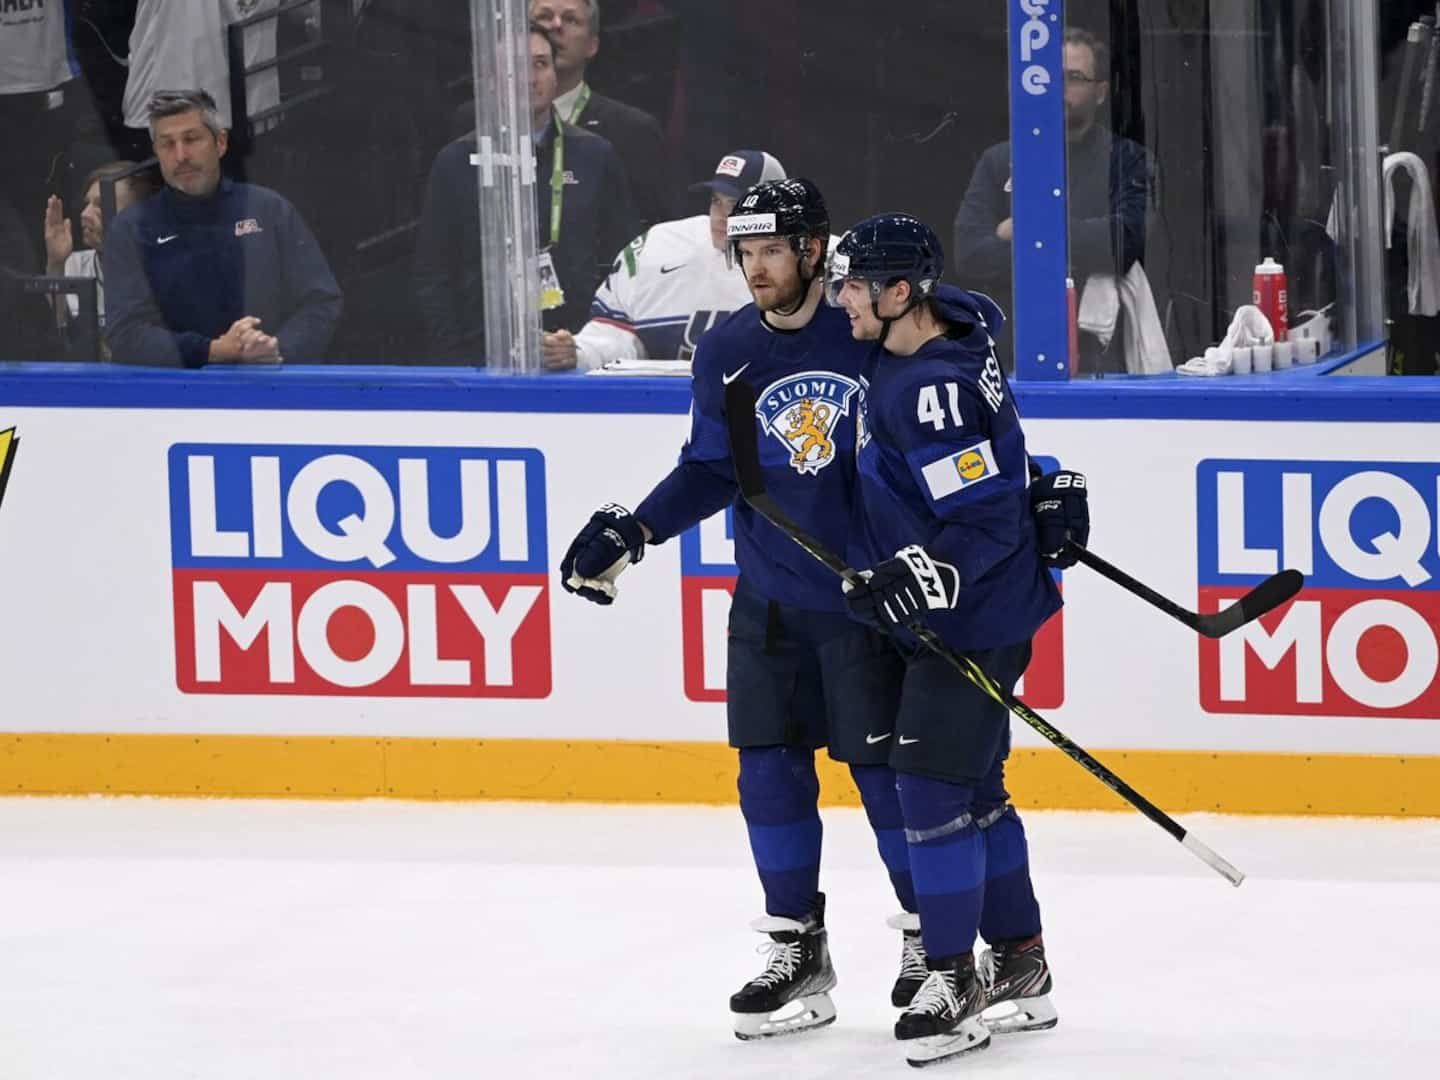 Finland in the final of the World Championship